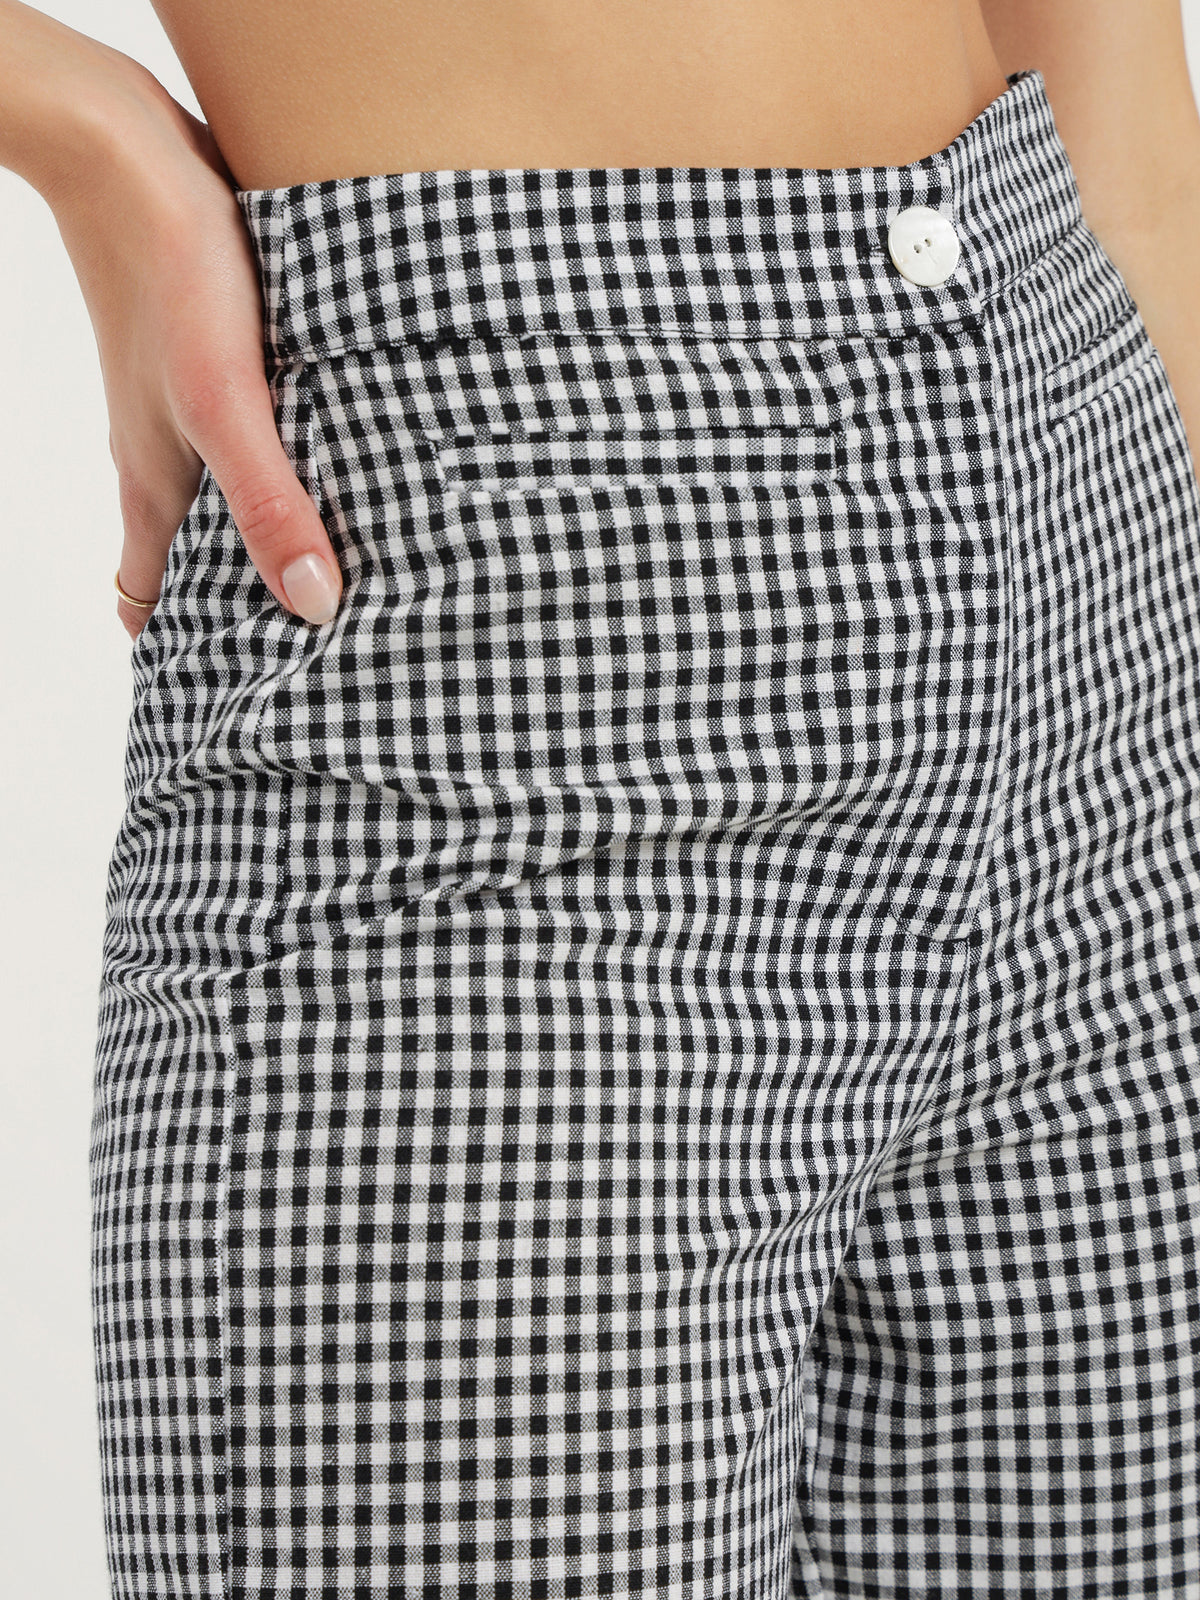 Tully Pants in Black Gingham